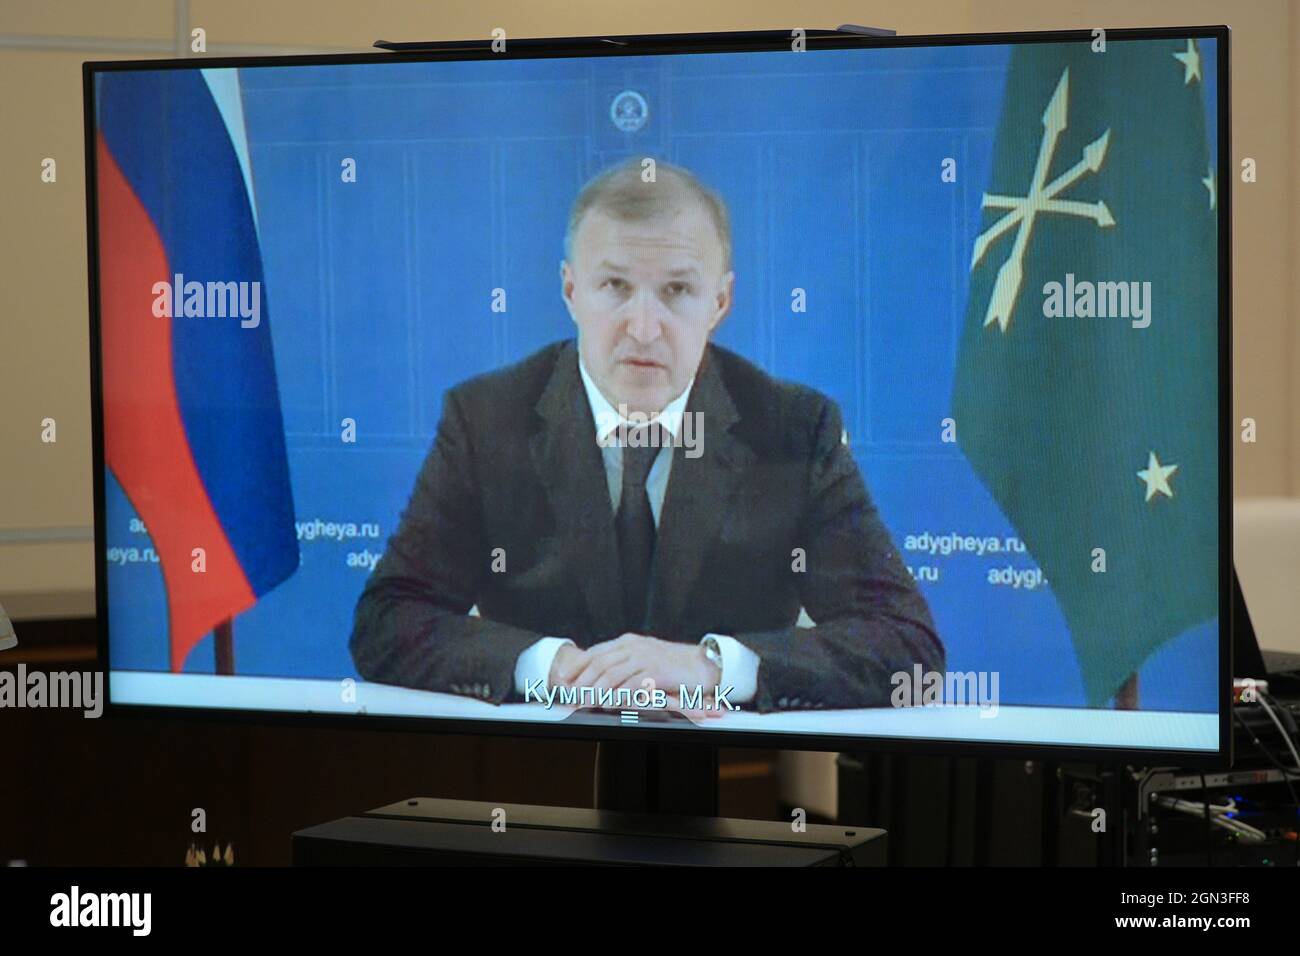 Moscow Region, Russia. 22nd Sep, 2021. Pictured in this image is a video  screen in President Putin's office in the Novo Ogaryovo residence showing  the head of Russia's Republic of Adygea, Murat